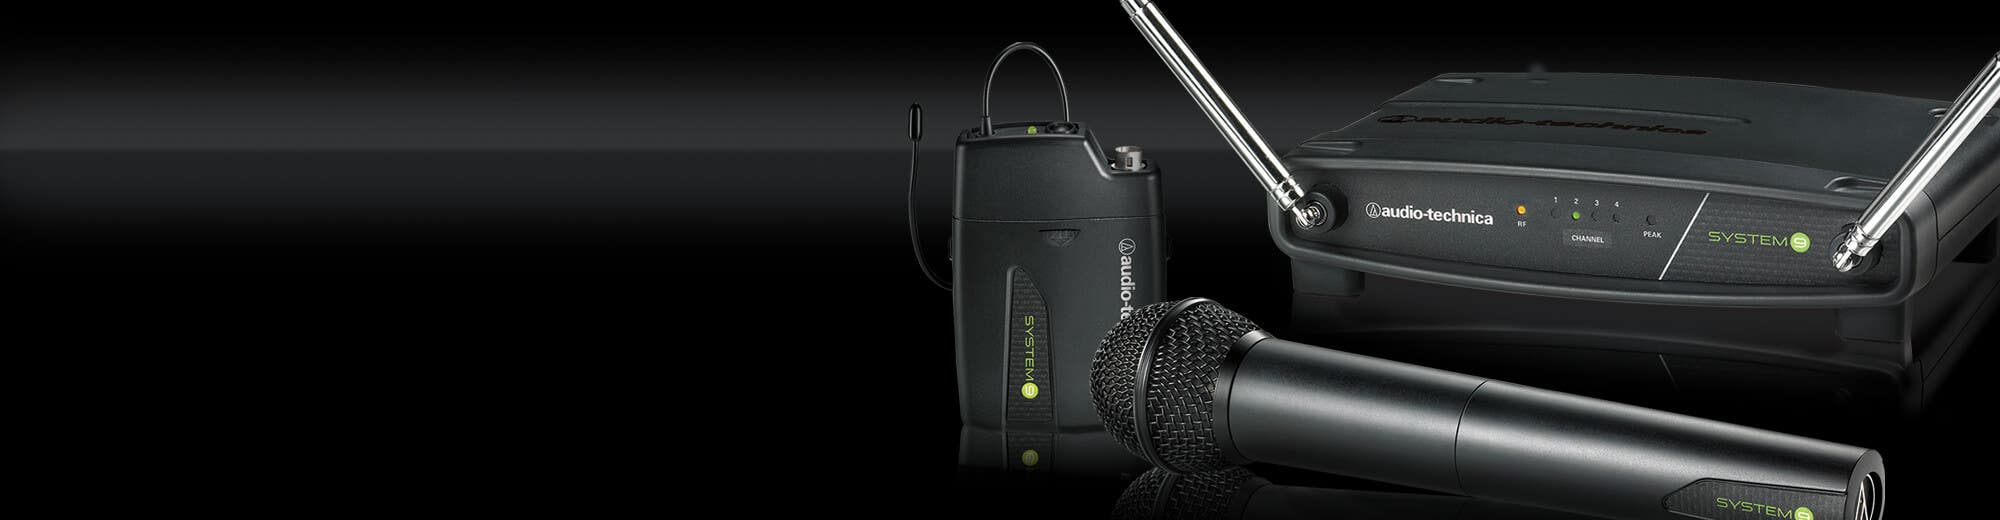 System 9 - Line Series - Wireless Systems - Microphones | Audio 